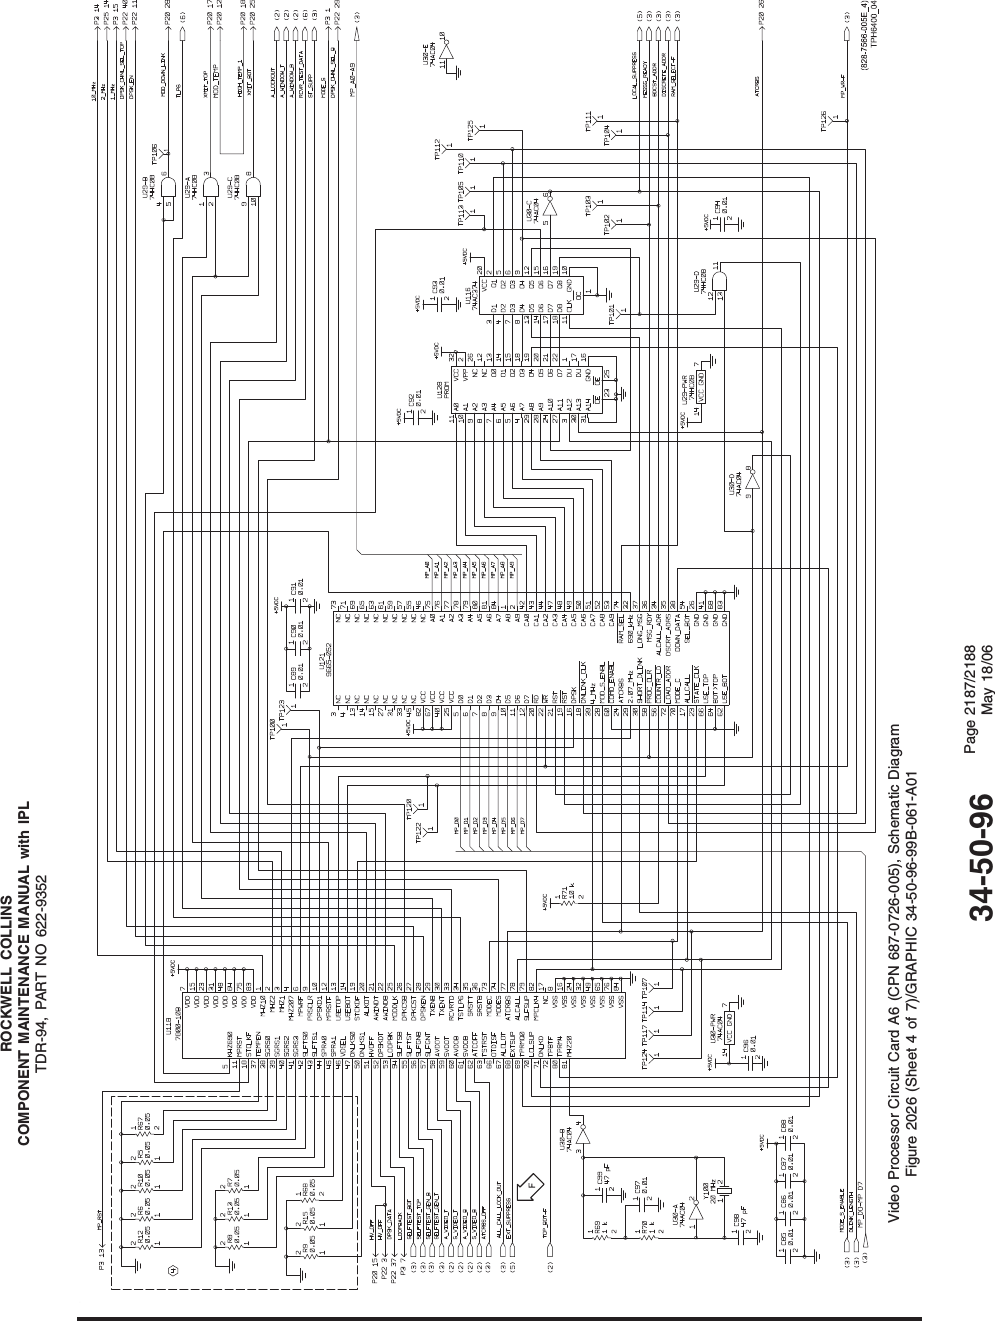 ROCKWELL COLLINSCOMPONENT MAINTENANCE MANUAL with IPLTDR-94, PART NO 622-9352Video Processor Circuit Card A6 (CPN 687-0726-005), Schematic DiagramFigure 2026 (Sheet 4 of 7)/GRAPHIC 34-50-96-99B-061-A0134-50-96 Page 2187/2188May 18/06